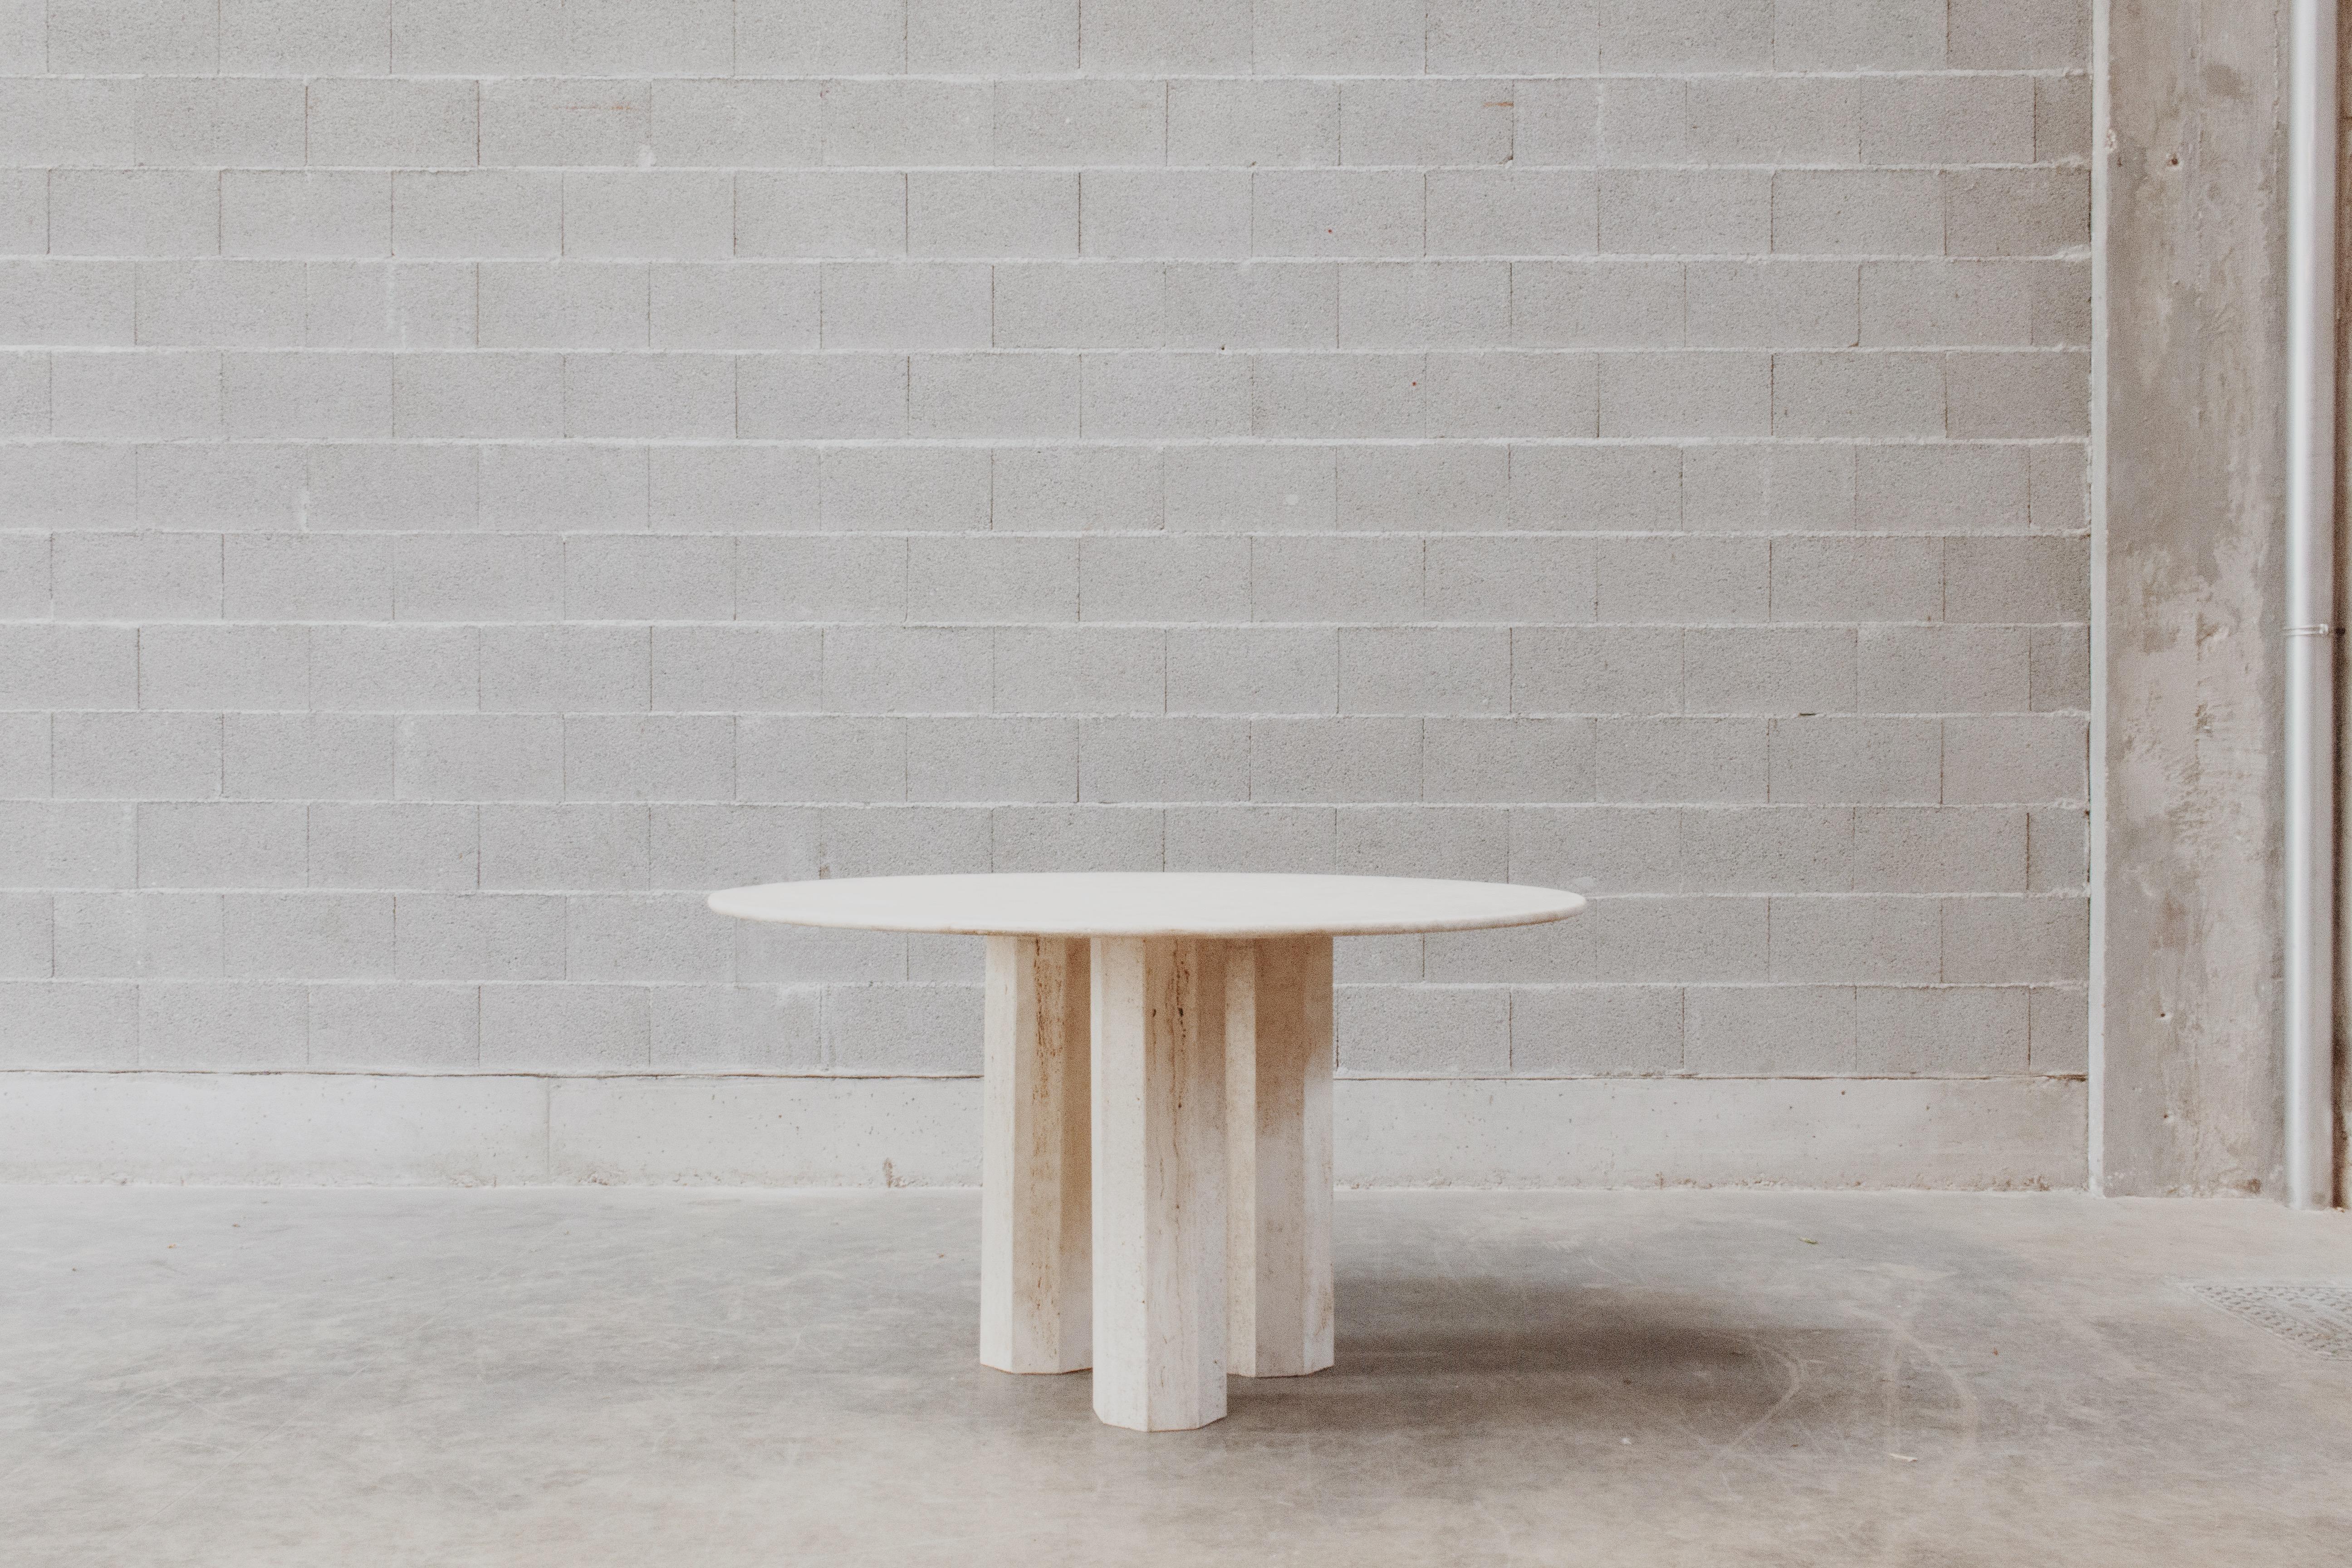 Sculptural dining table in travertine, Italy, 1975

This particular dining table reflects the typical sculptural Italian design of the 1970s. Entirely manufactured in Roman travertine, it comprehends three hexagonal legs supporting the round marble